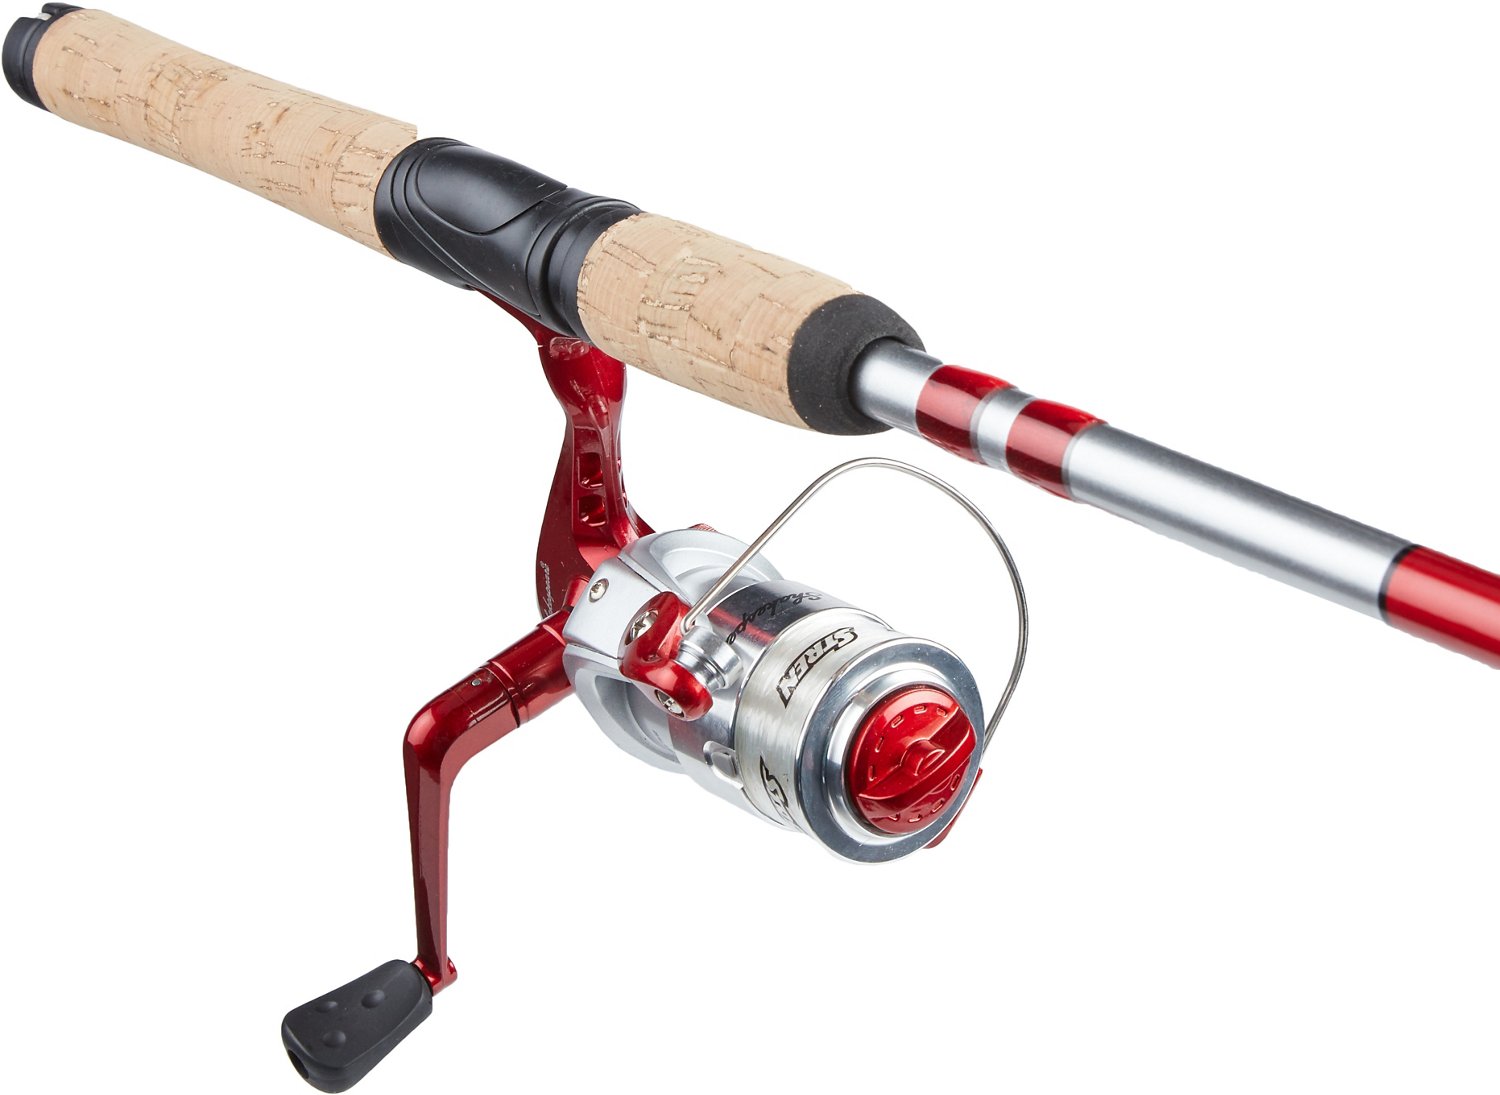 Shakespeare Catch More Fish 6' Rod & Reel Combo Lake & Pond Fishing Kit  w/Tackle